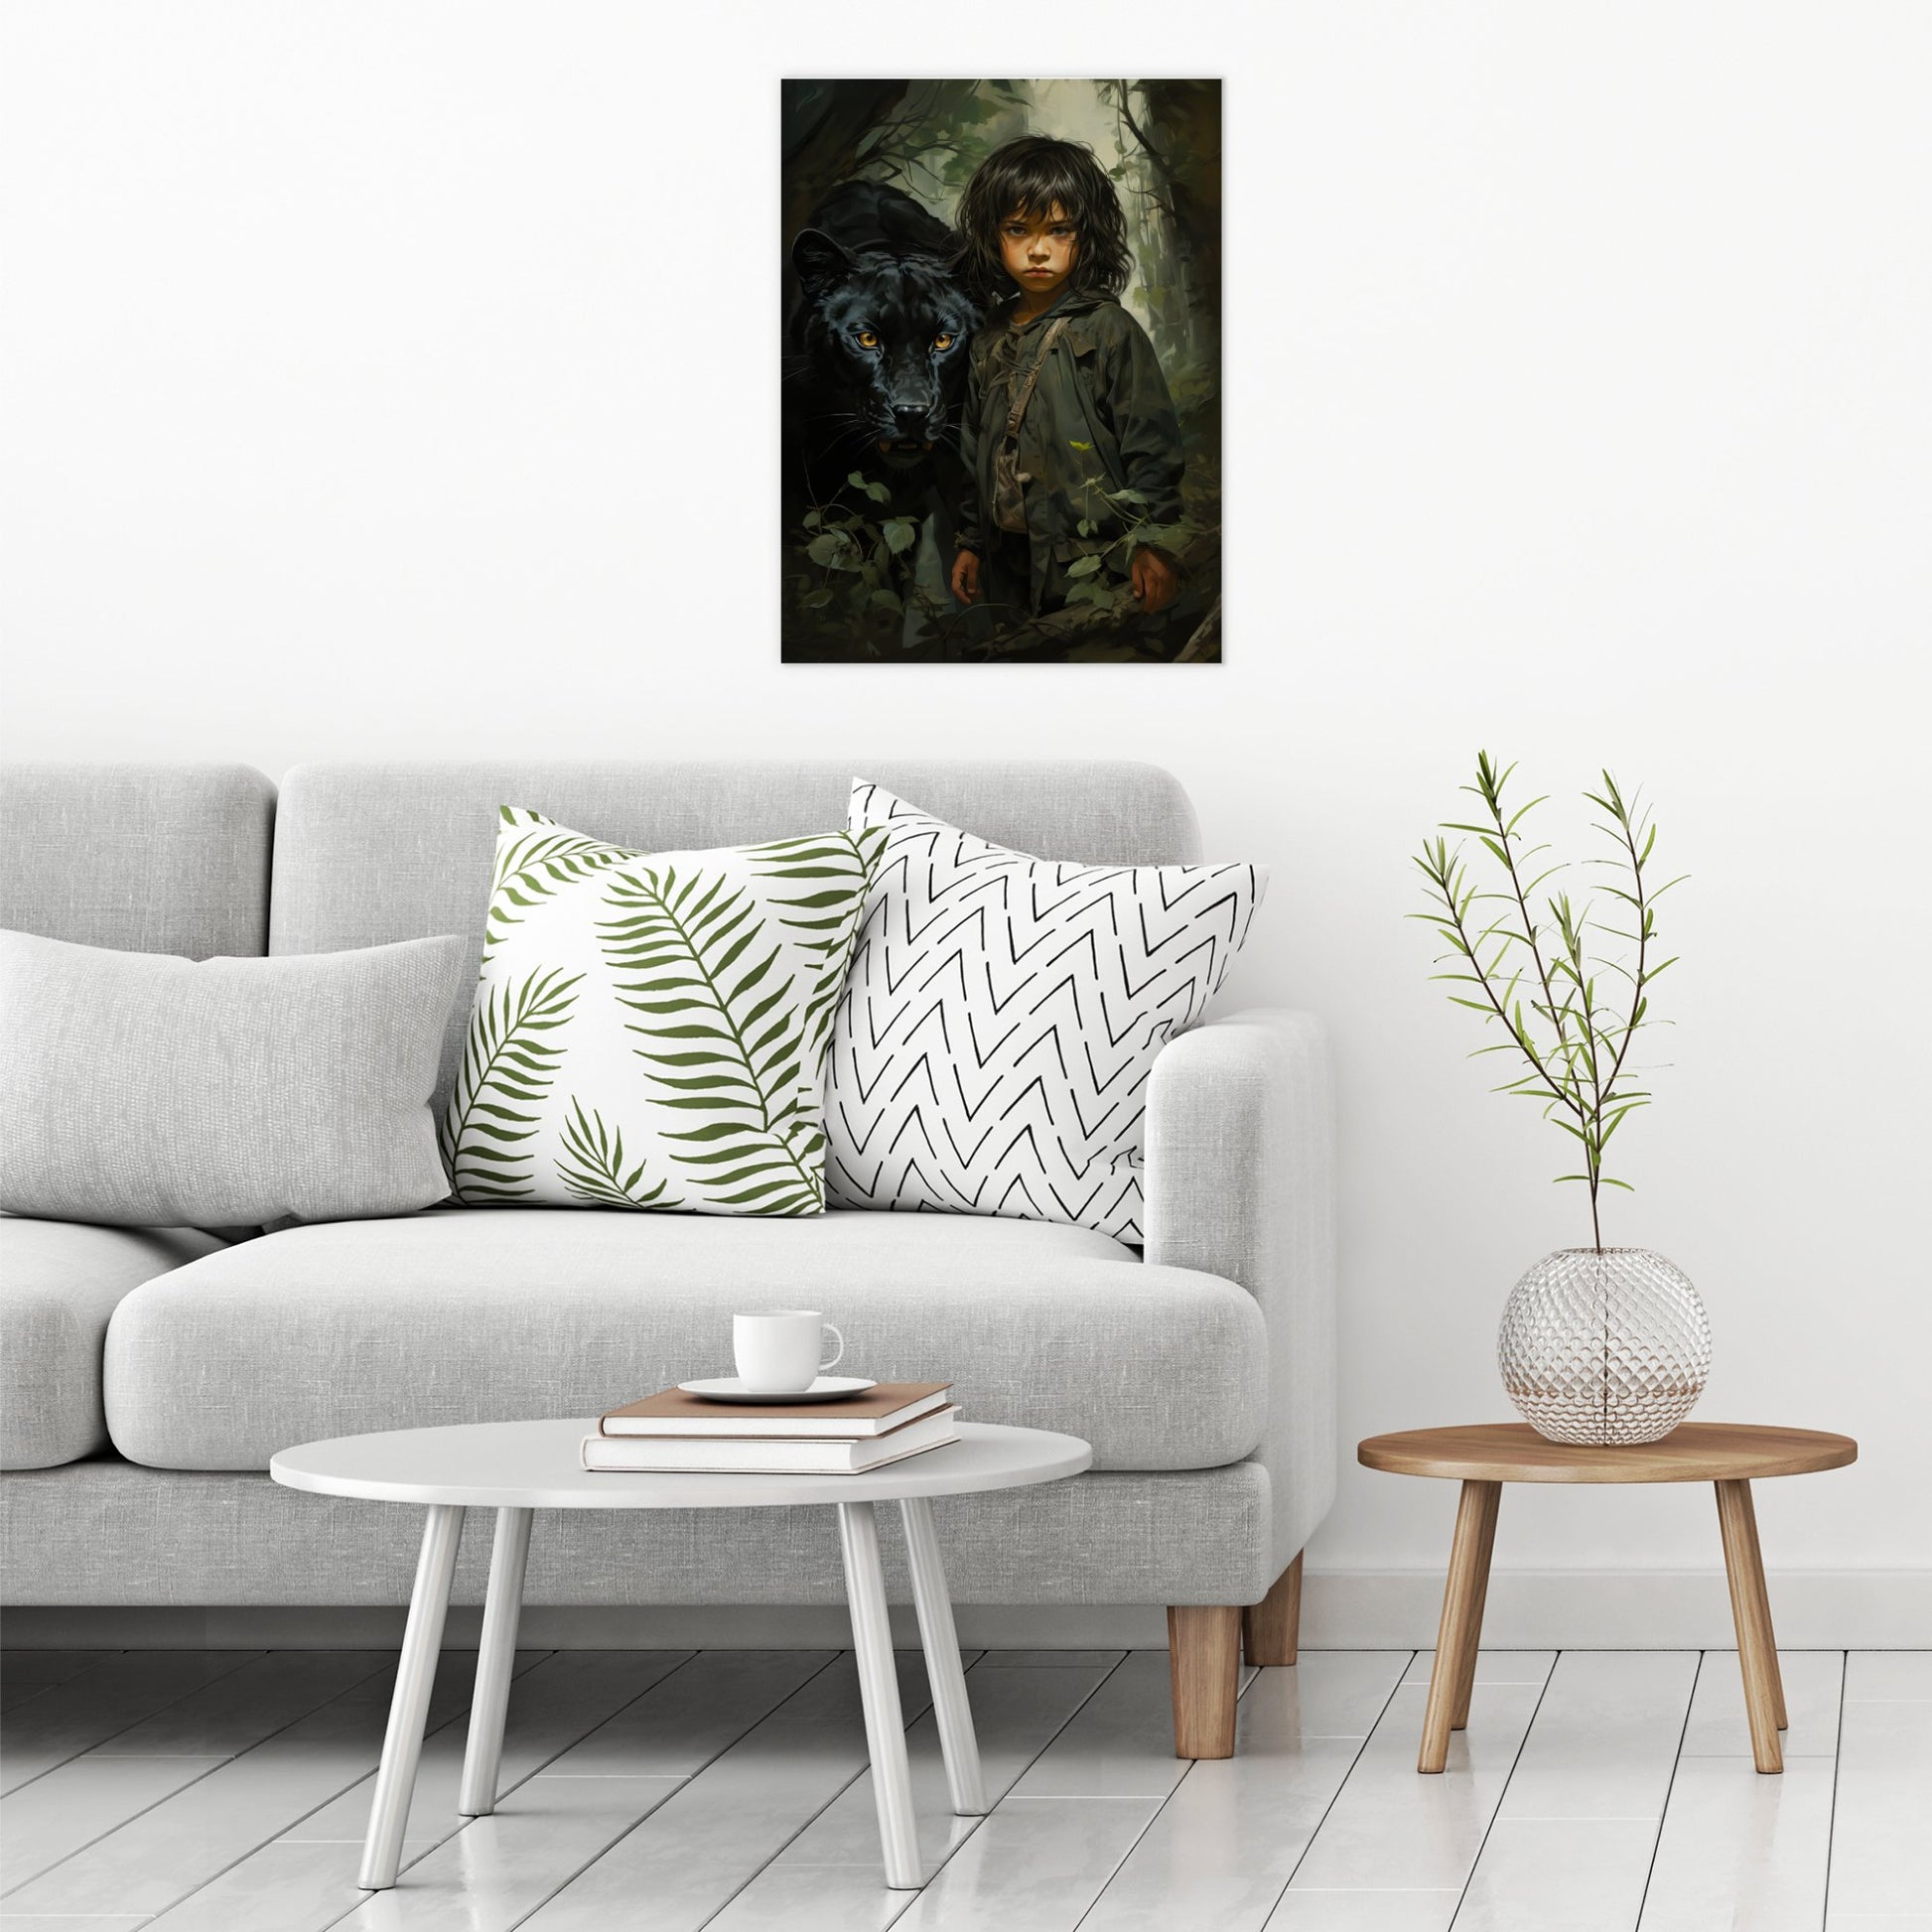 A contemporary modern room view showing a large size metal art poster display plate with printed design of a Boy and Black Panther Fantasy Painting